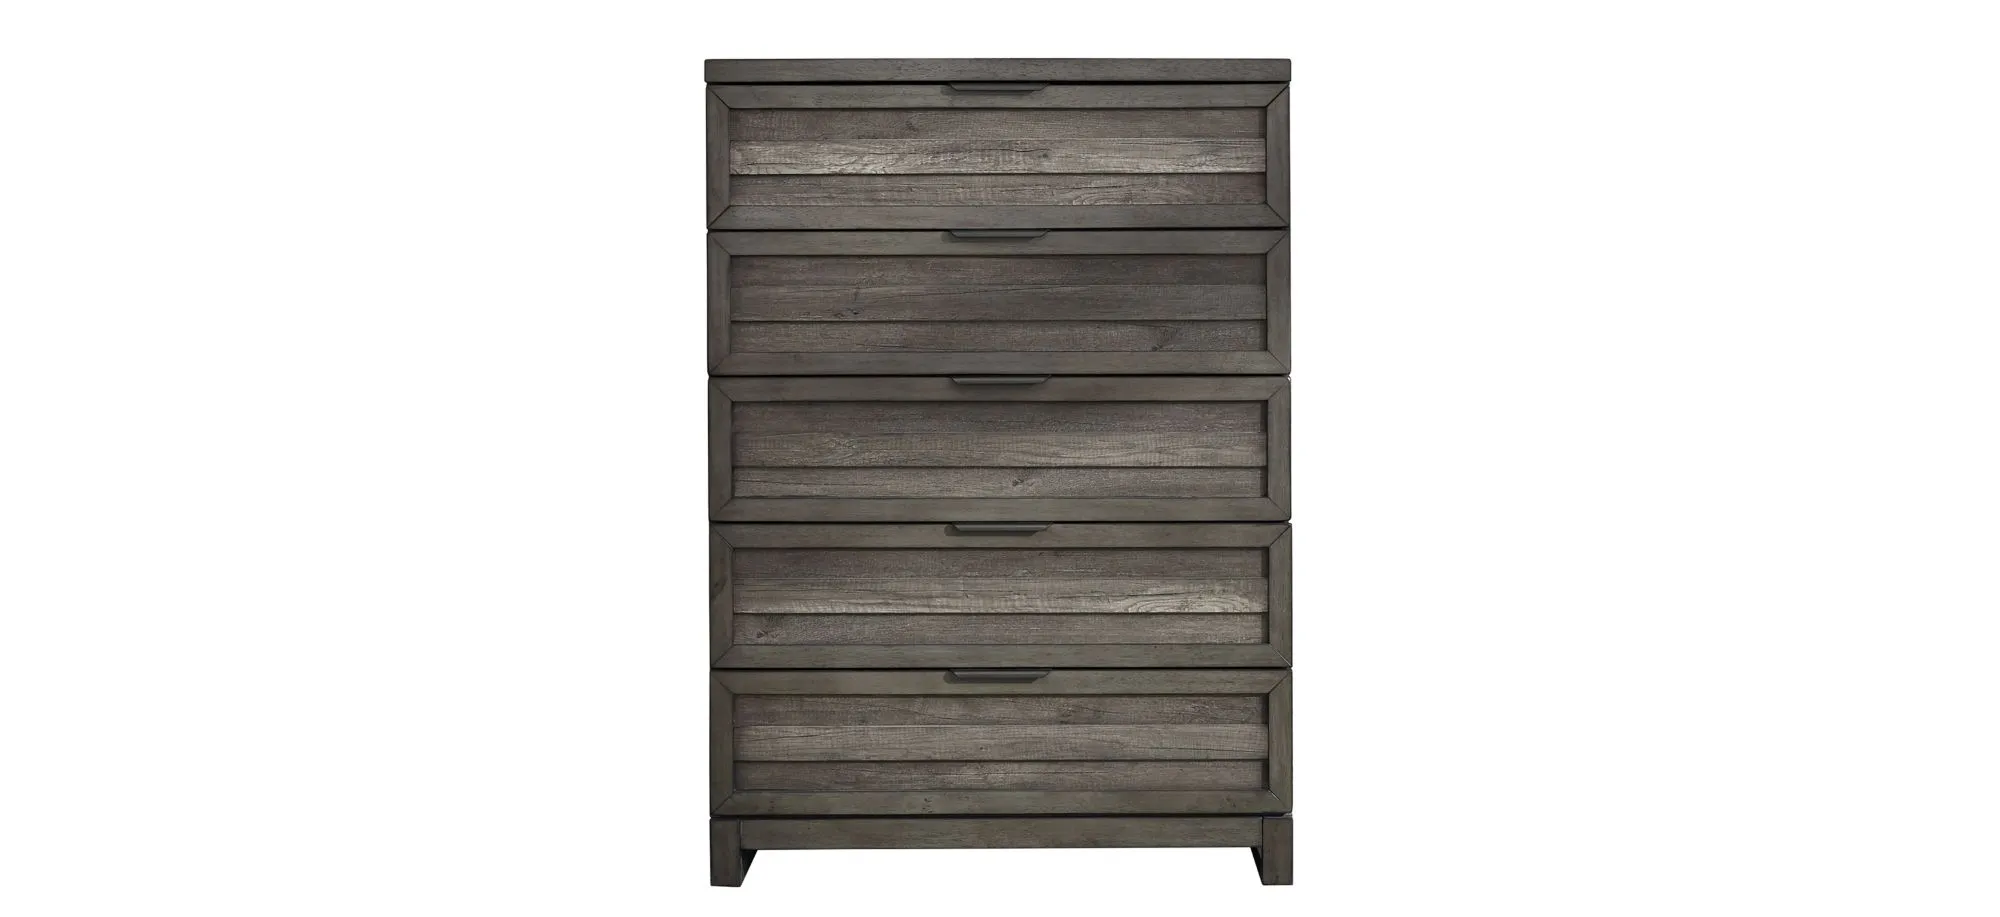 Tanners Creek Bedroom Chest in Medium Gray by Liberty Furniture